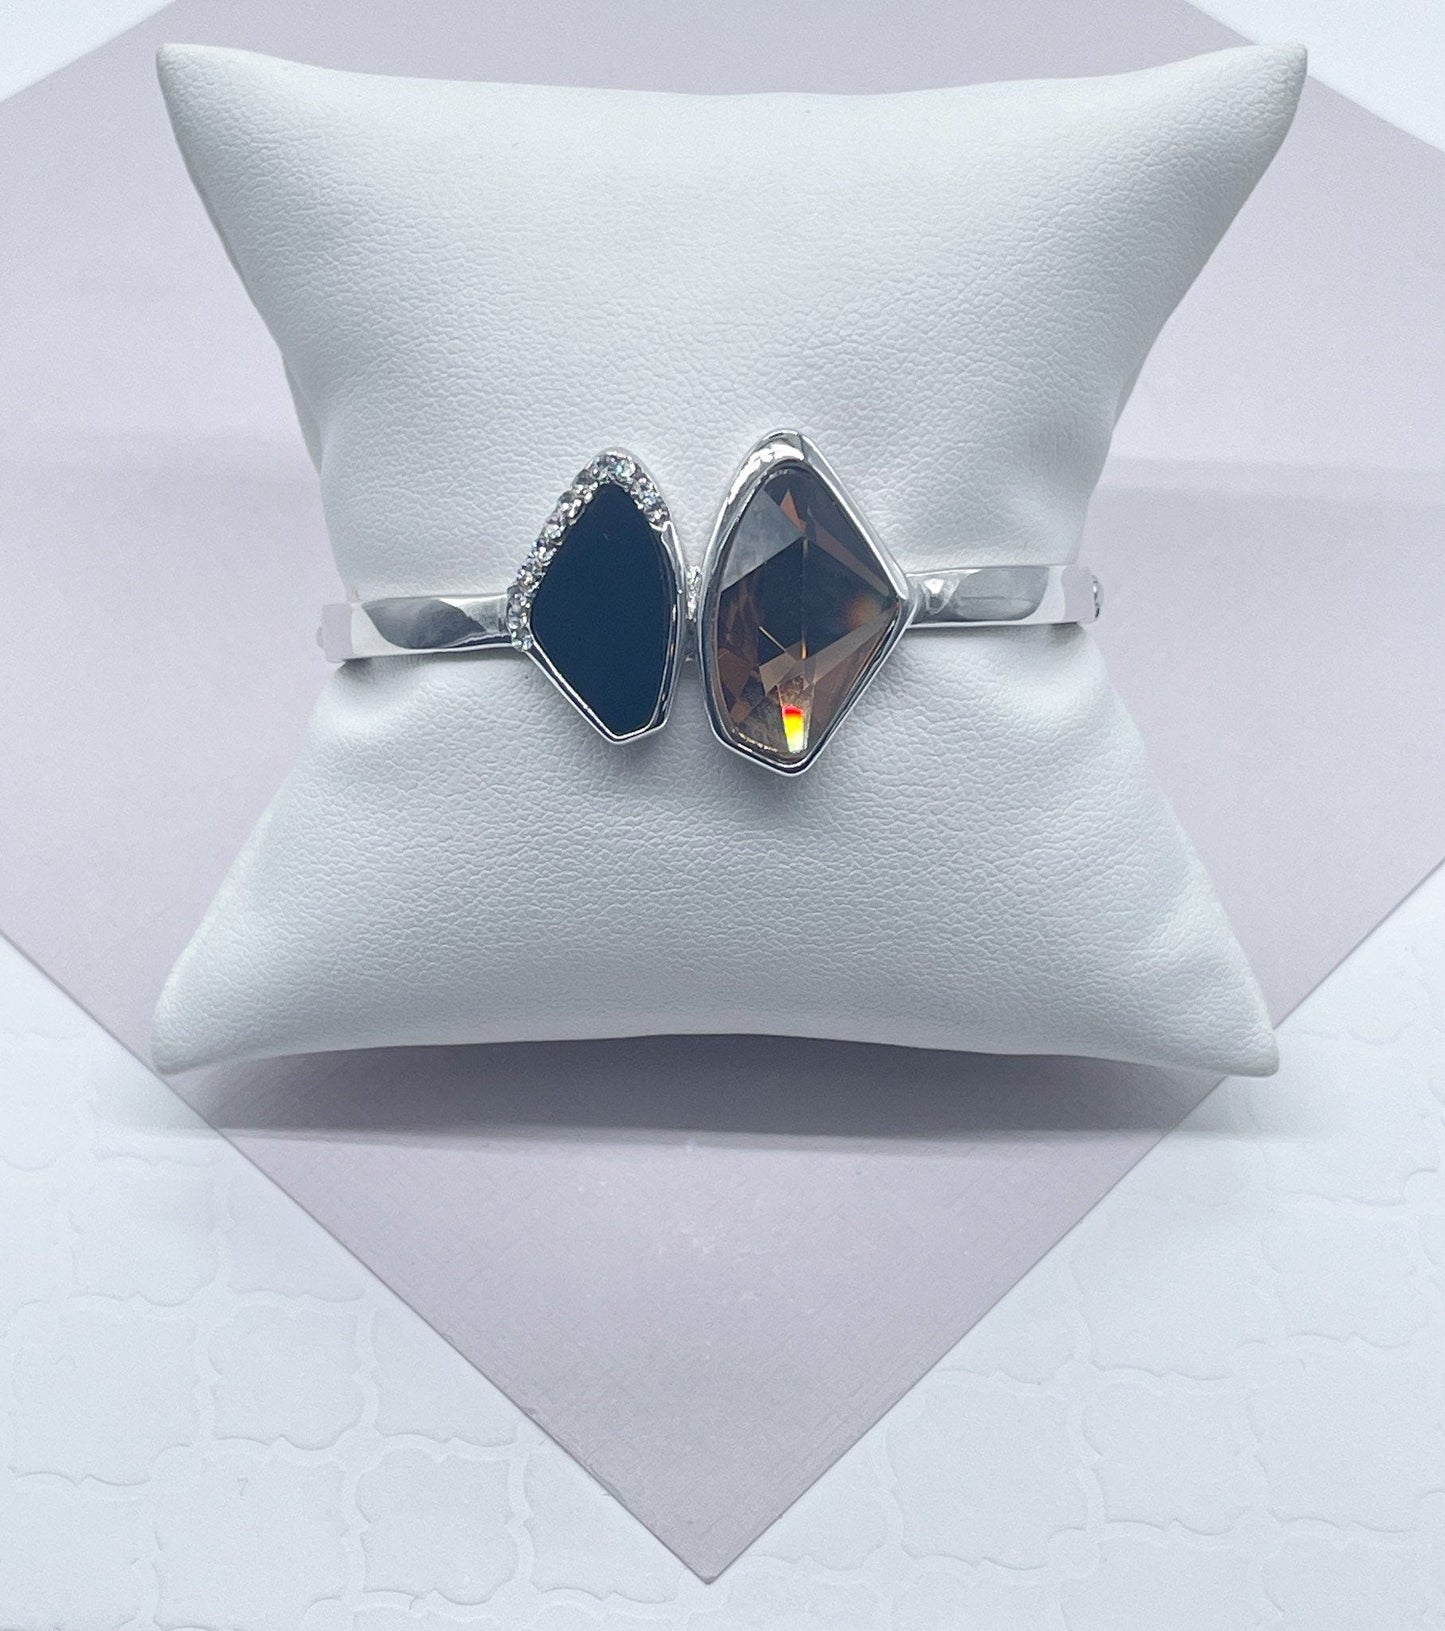 Silver Layered Cuff Bracelet With Simulated Soft Brown and Black Stones Partially